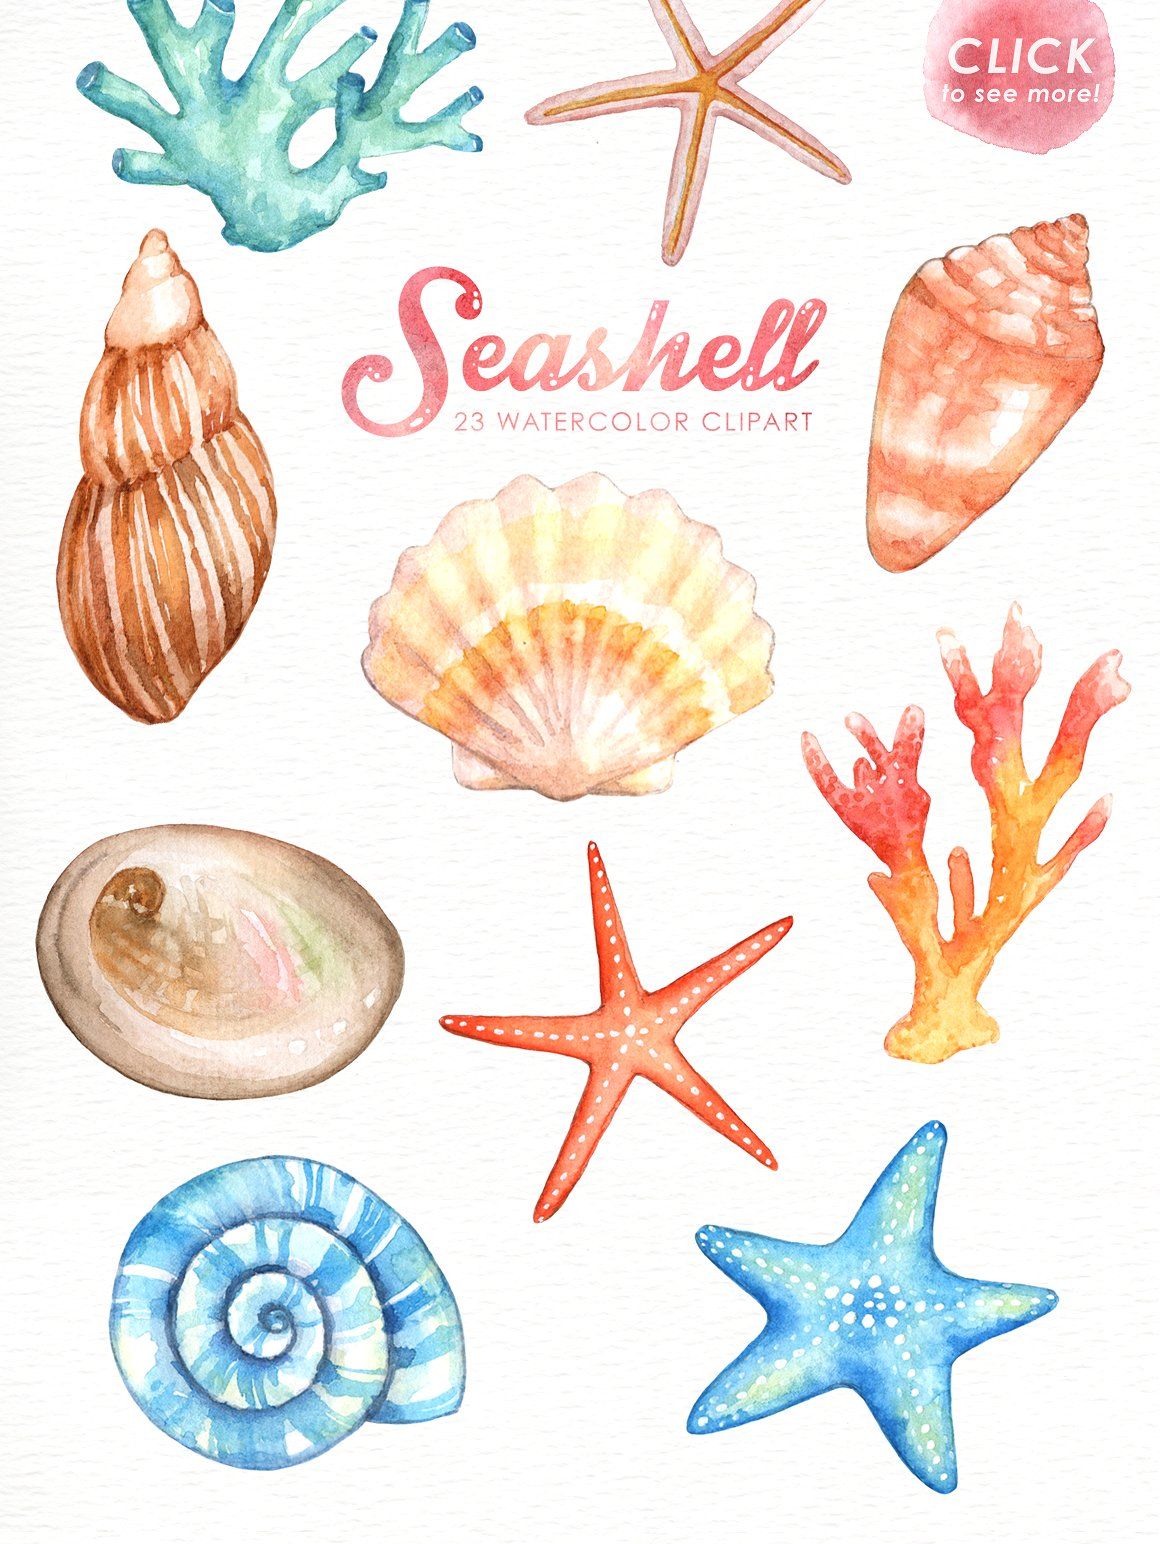 Seashell Watercolor cliparts by everysunsun on